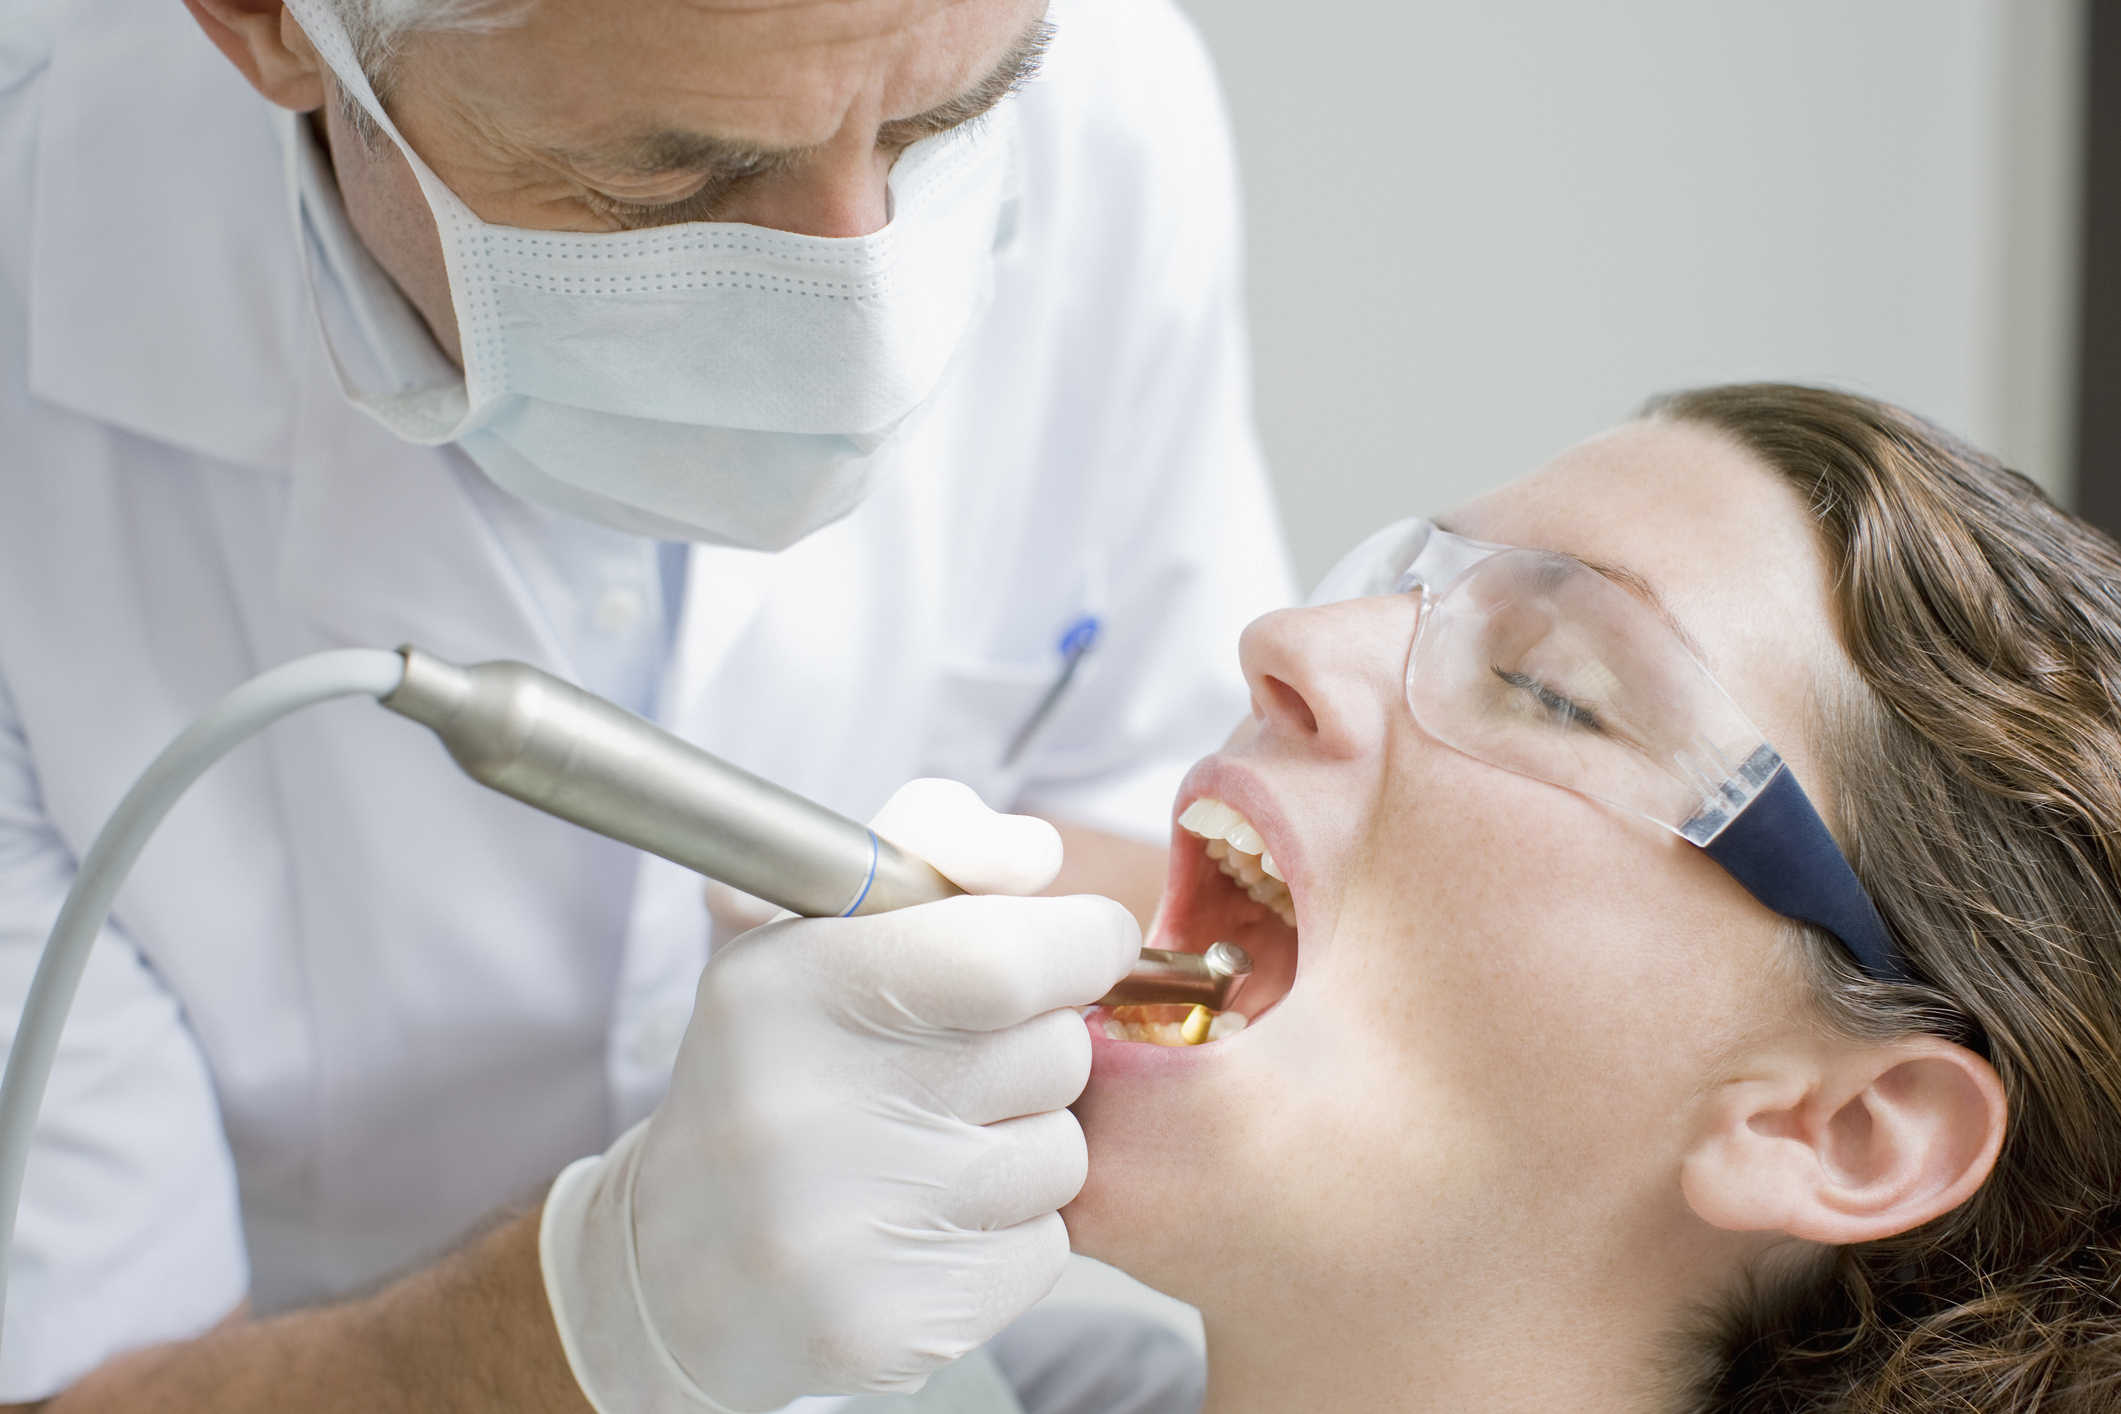 Dentist performing a dental procedure on a female patient in a clinic